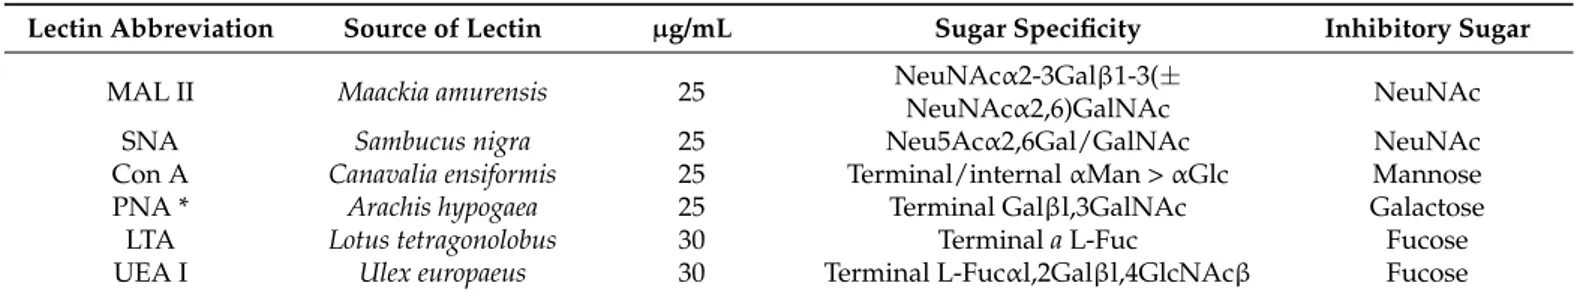 Table 2. Lectin used, their sugar specificities and the inhibitory sugars used in control experiments.